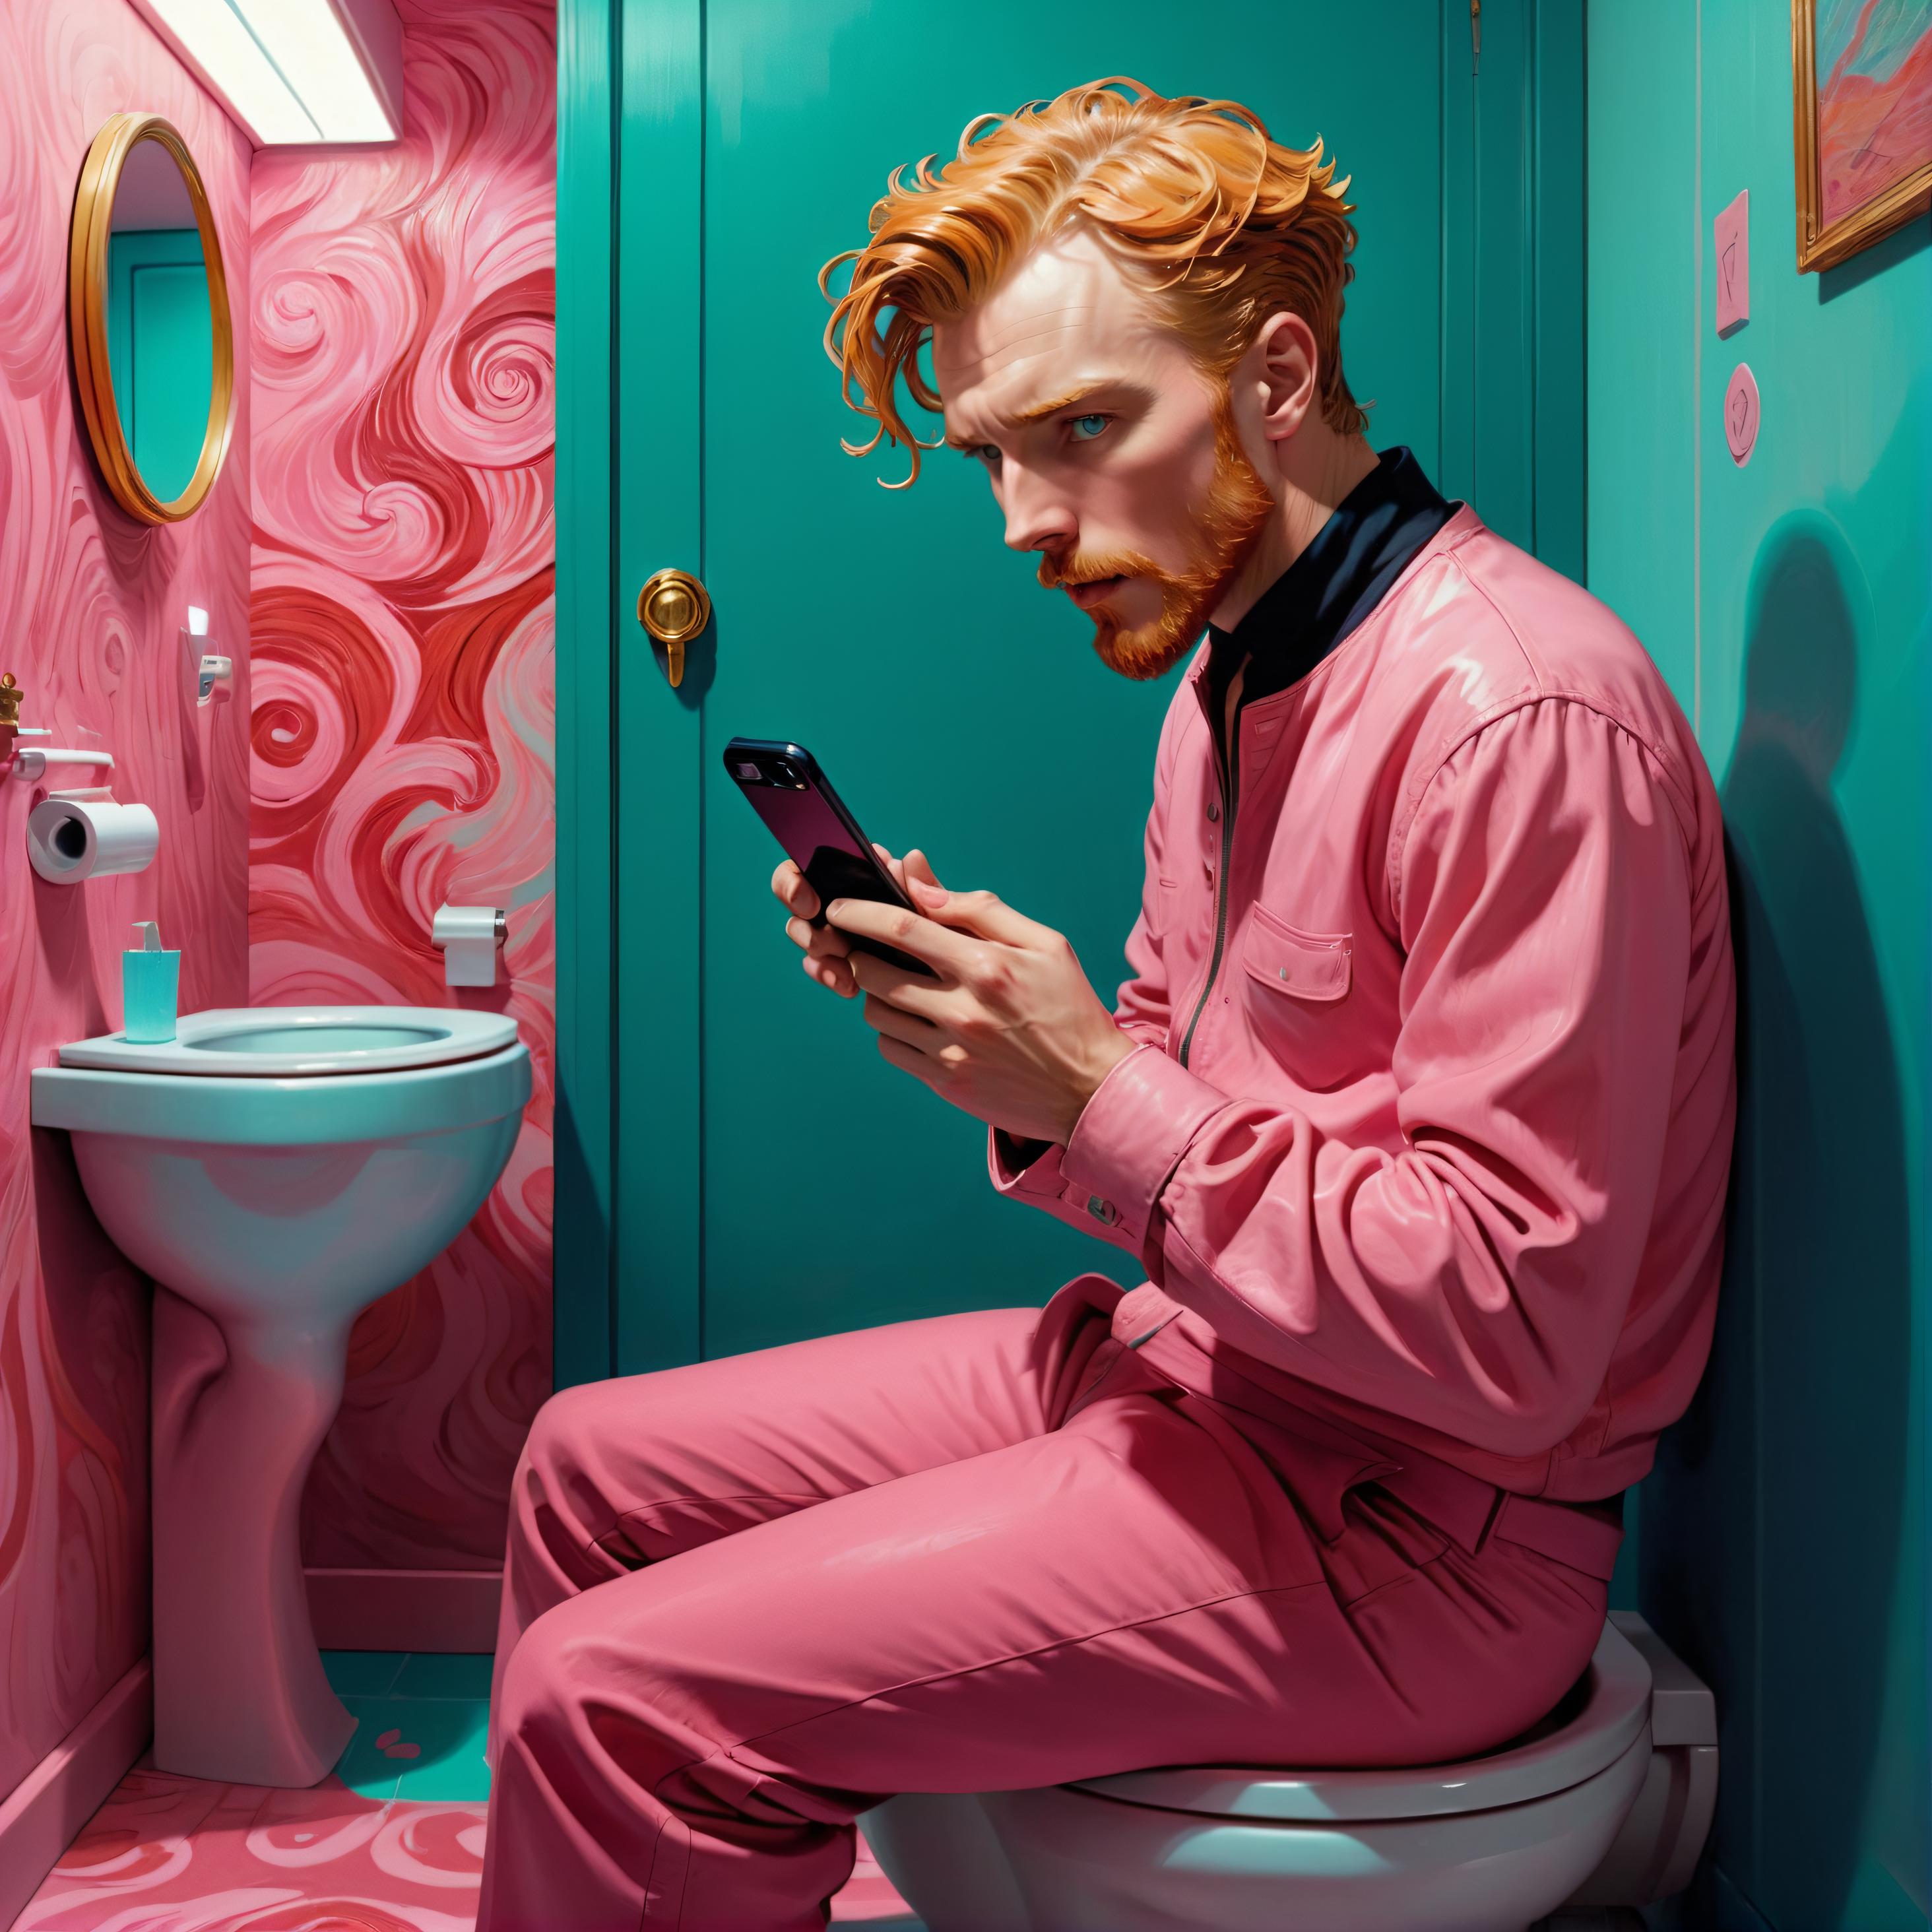 A man in pink pants is sitting on a toilet and using his cell phone.